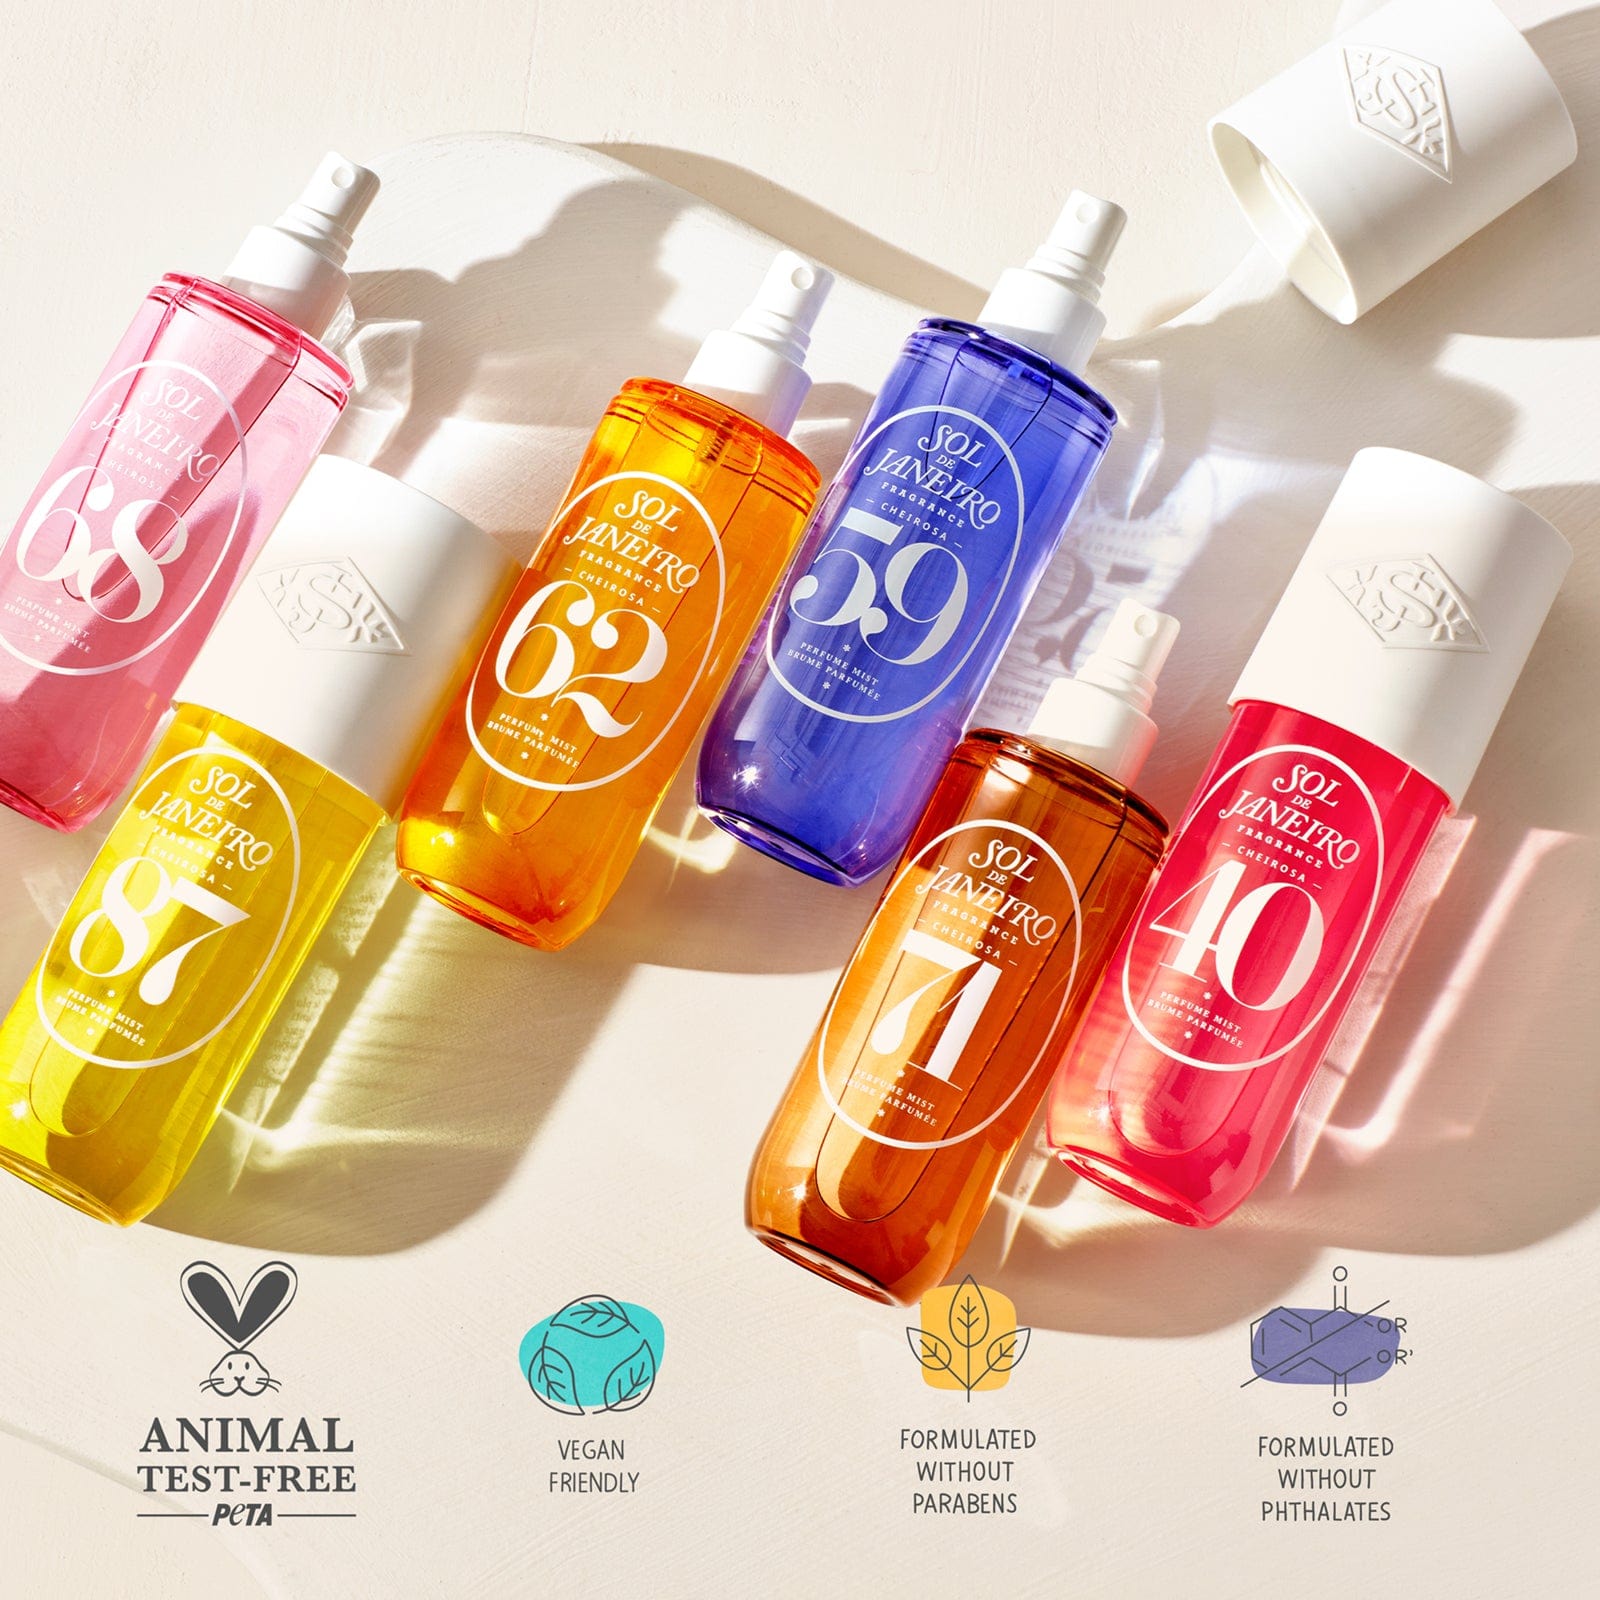 Animal test-free: vegan friendly, formulated without parabens, and phthalates